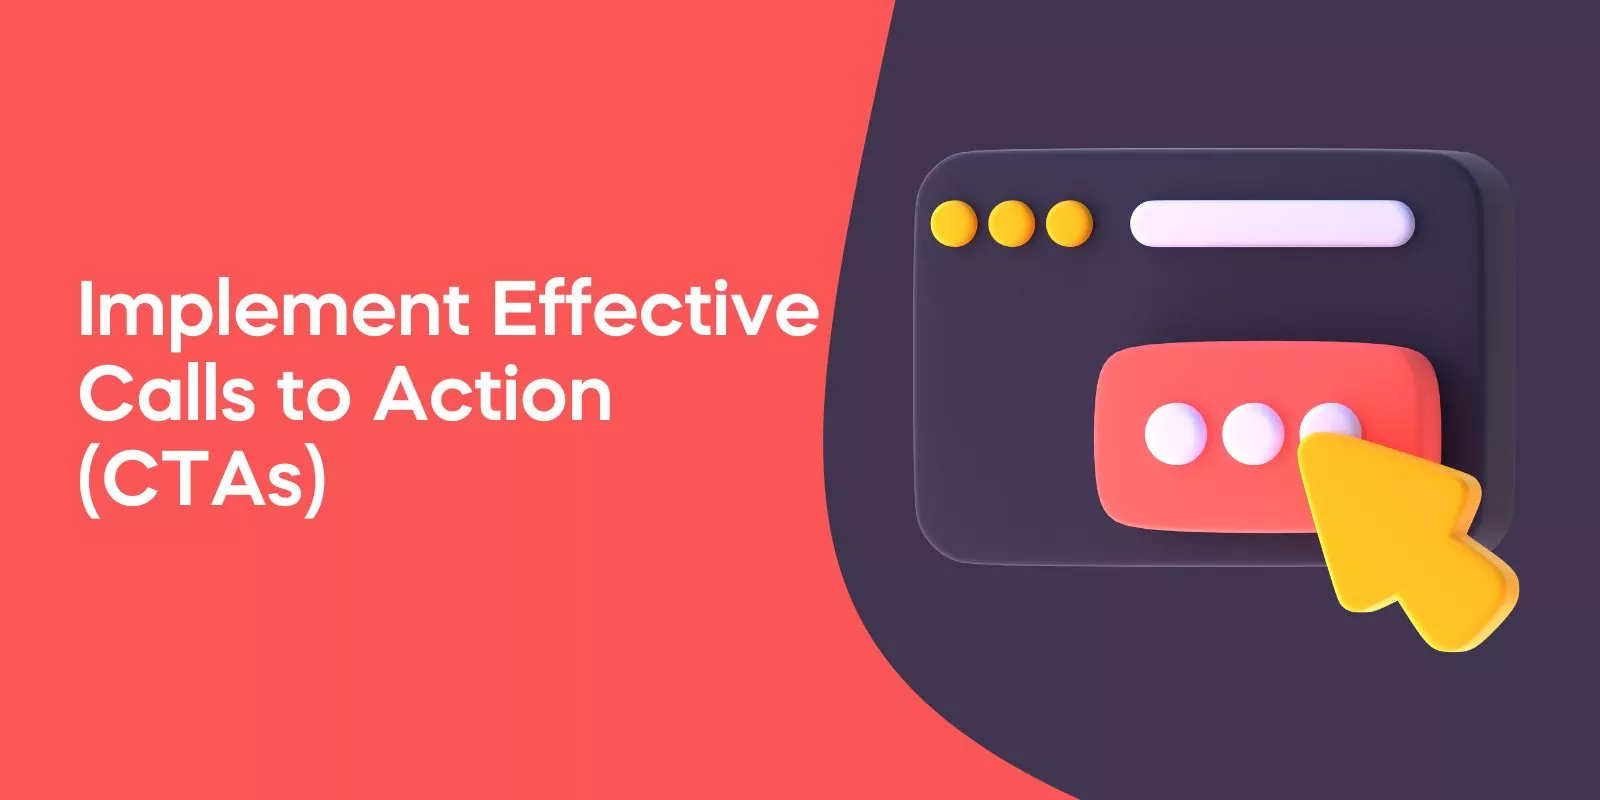 Implement Effective Calls to Action (CTAs)